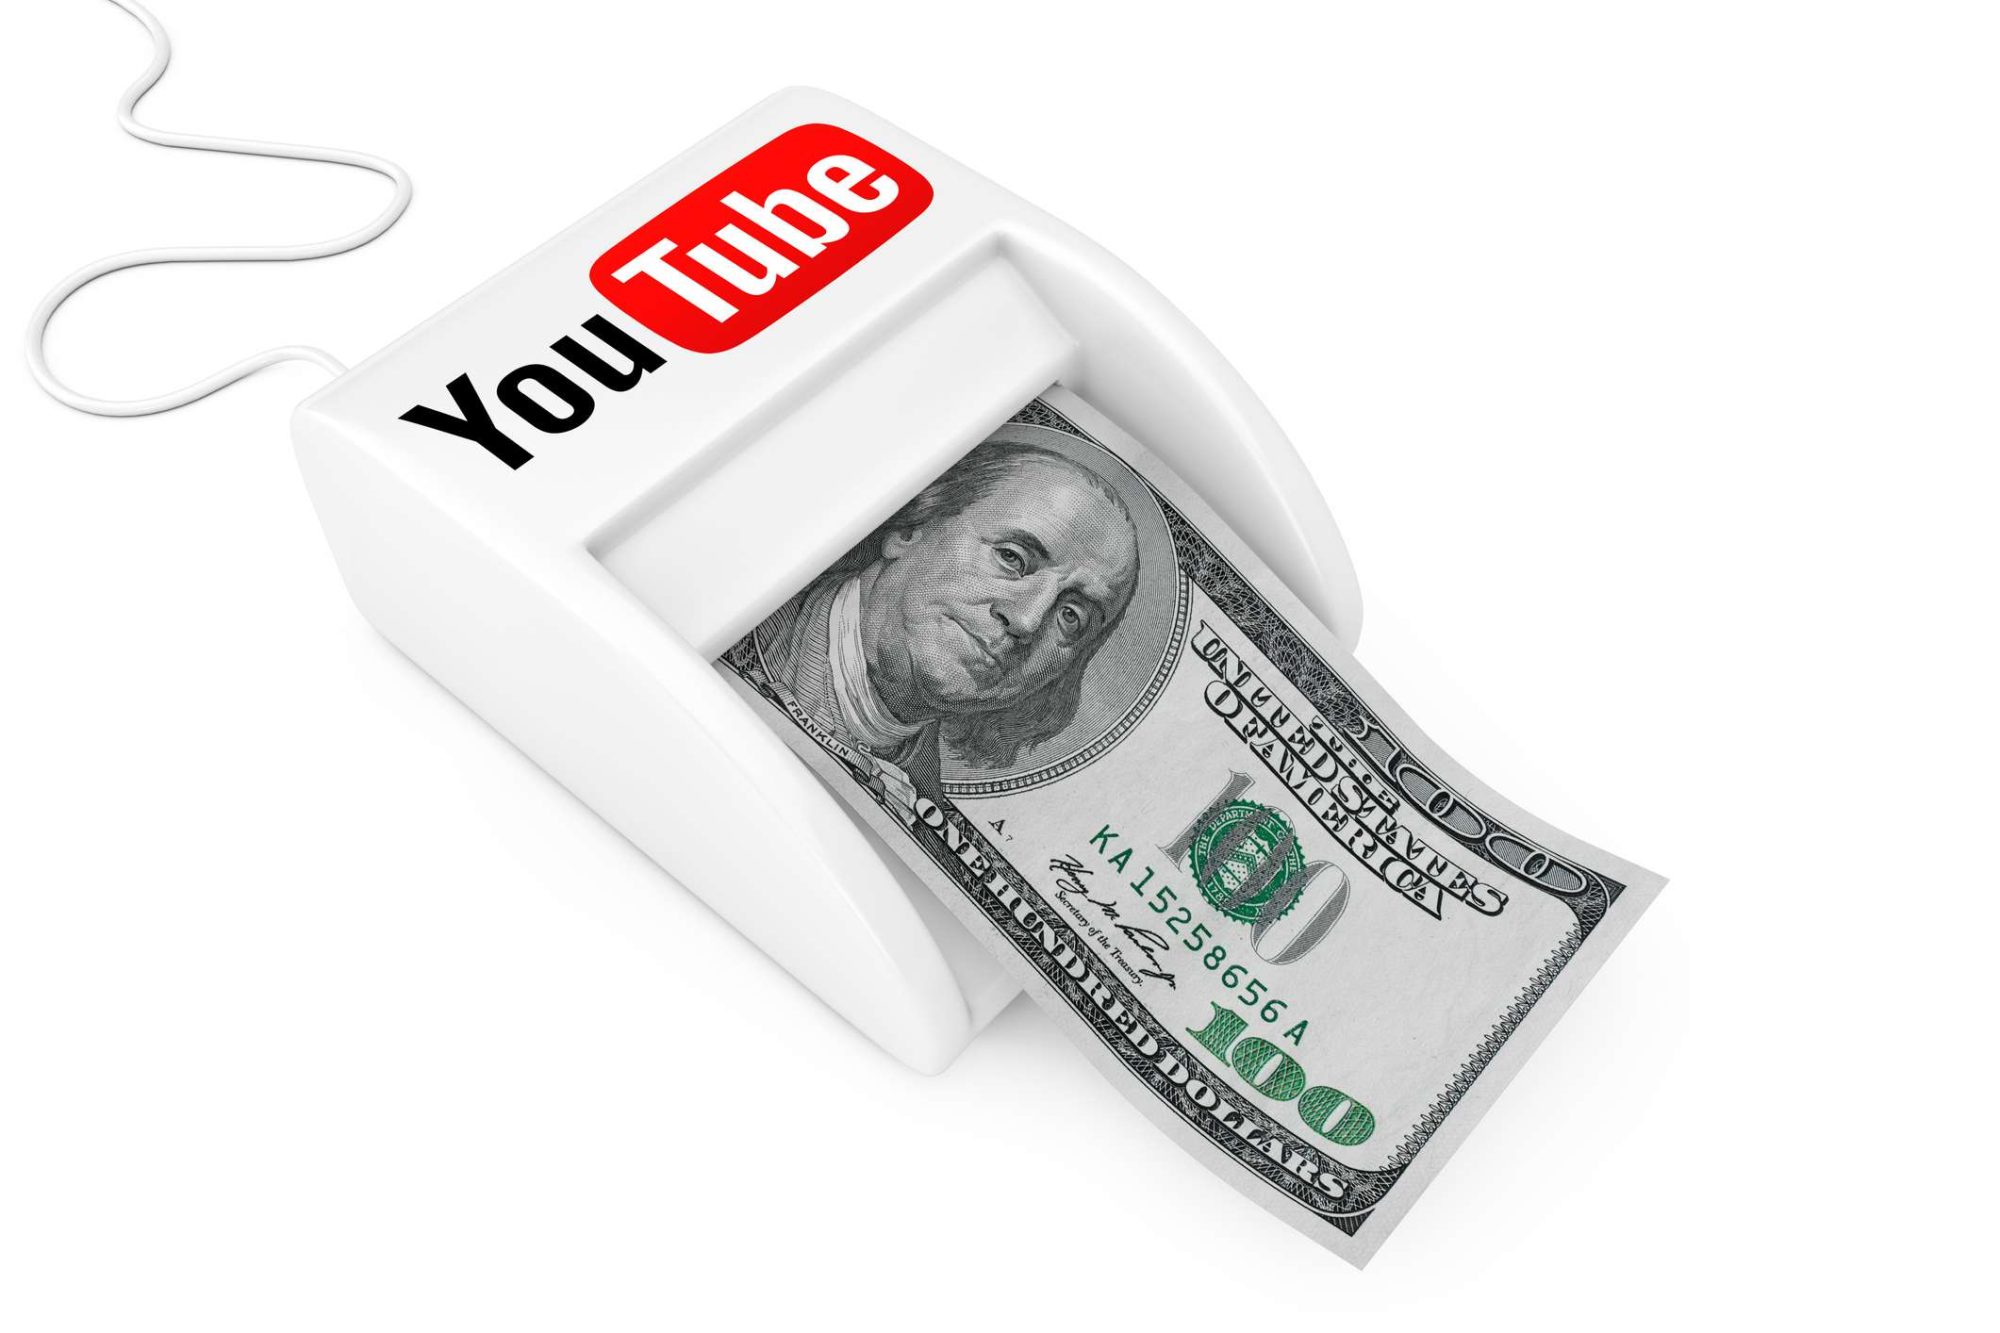 How to Earn Money From Youtube?